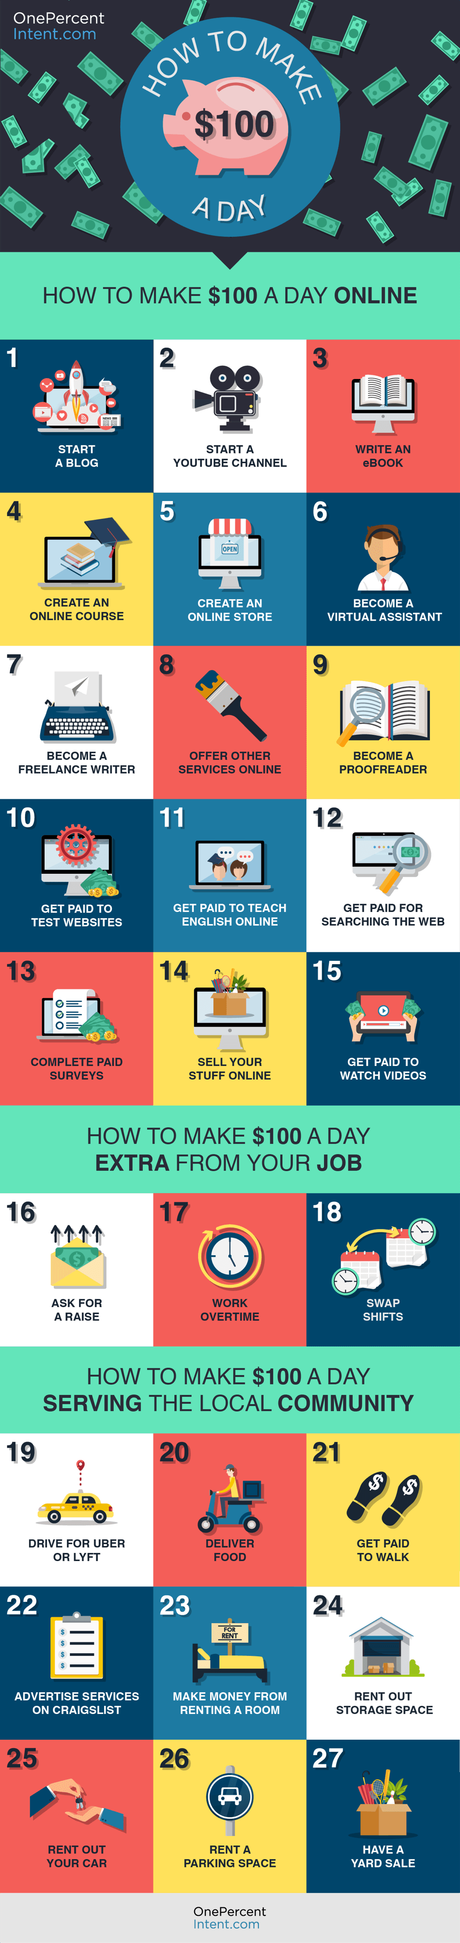 How to Make $100 a Day